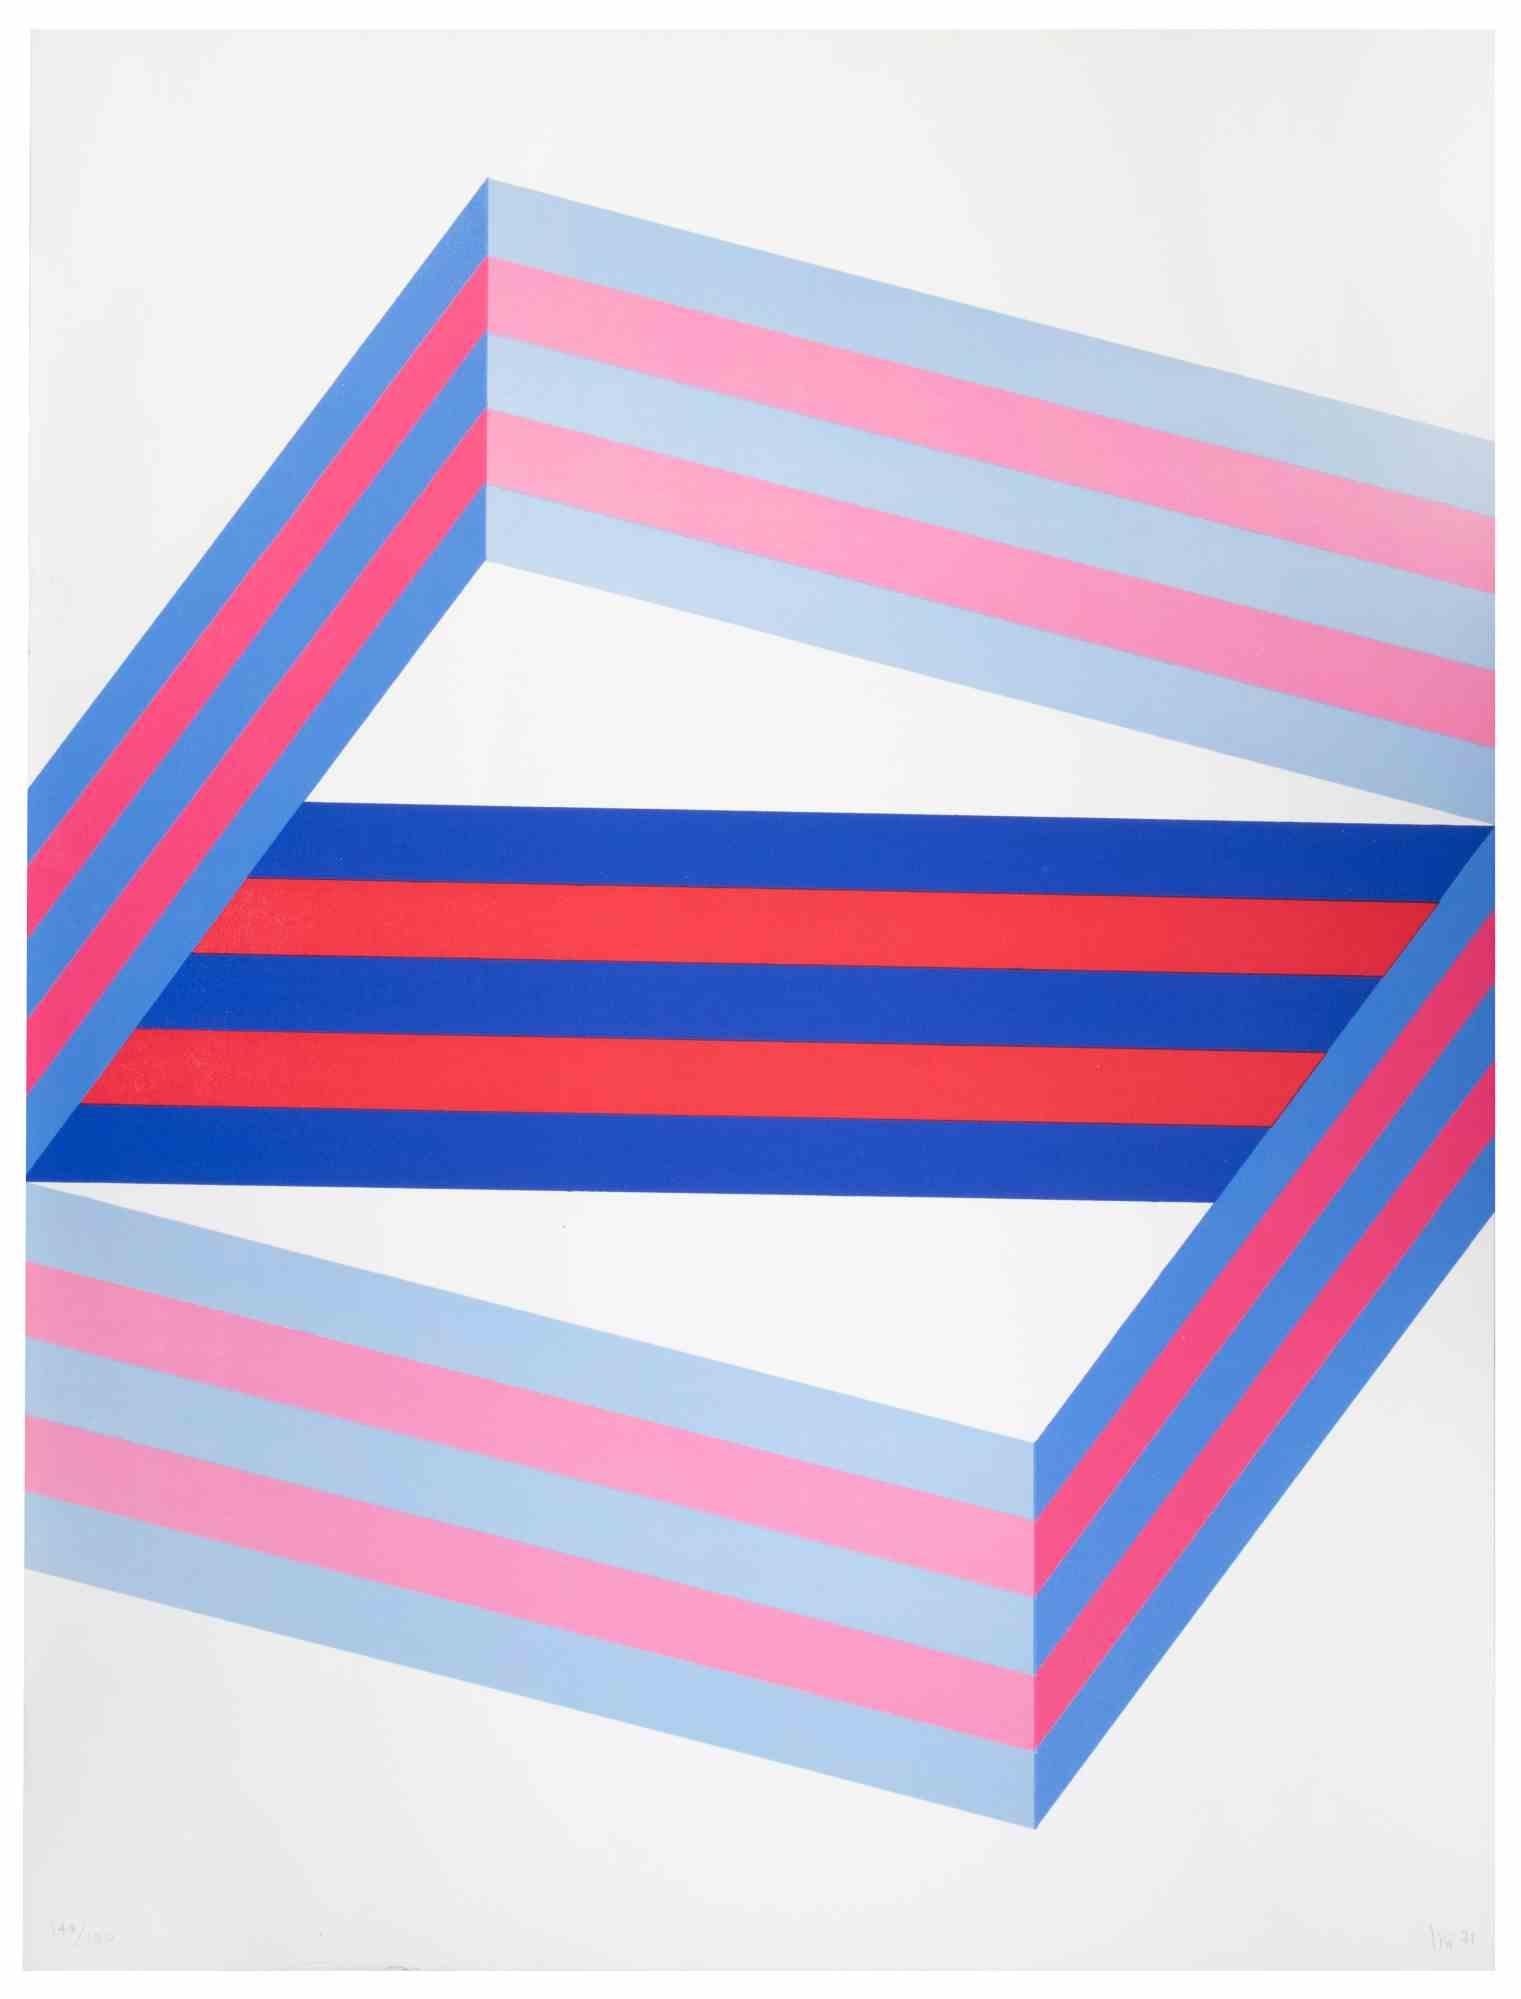 Perspective is a lithograph realized by Renato Livi in 1971.

Hand-signed and dated on the lower right margin.

Numbered on the lower left margin. Edition 144/150

Abstract composition on the tones of blue and pink, harmoniously realised by mastery